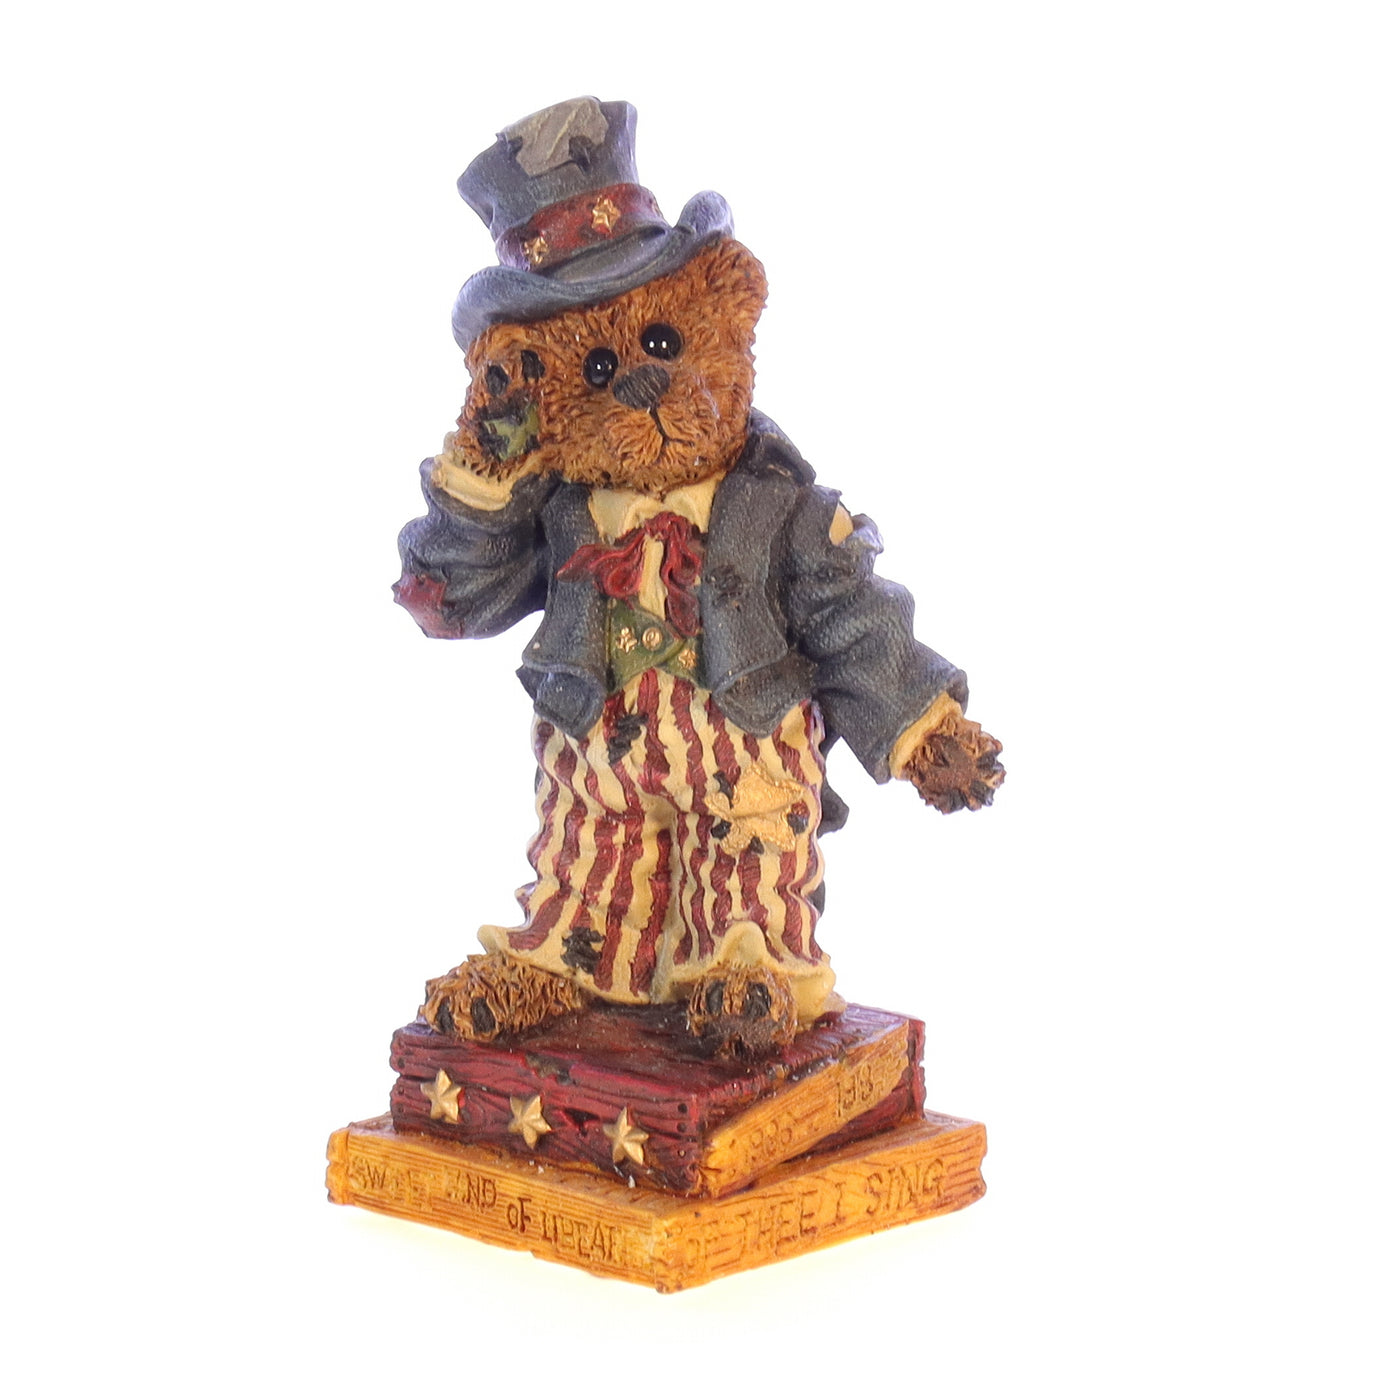 Boyds Bears Resin Figurine in Box 4th of July 01996-21 1996 4.75"